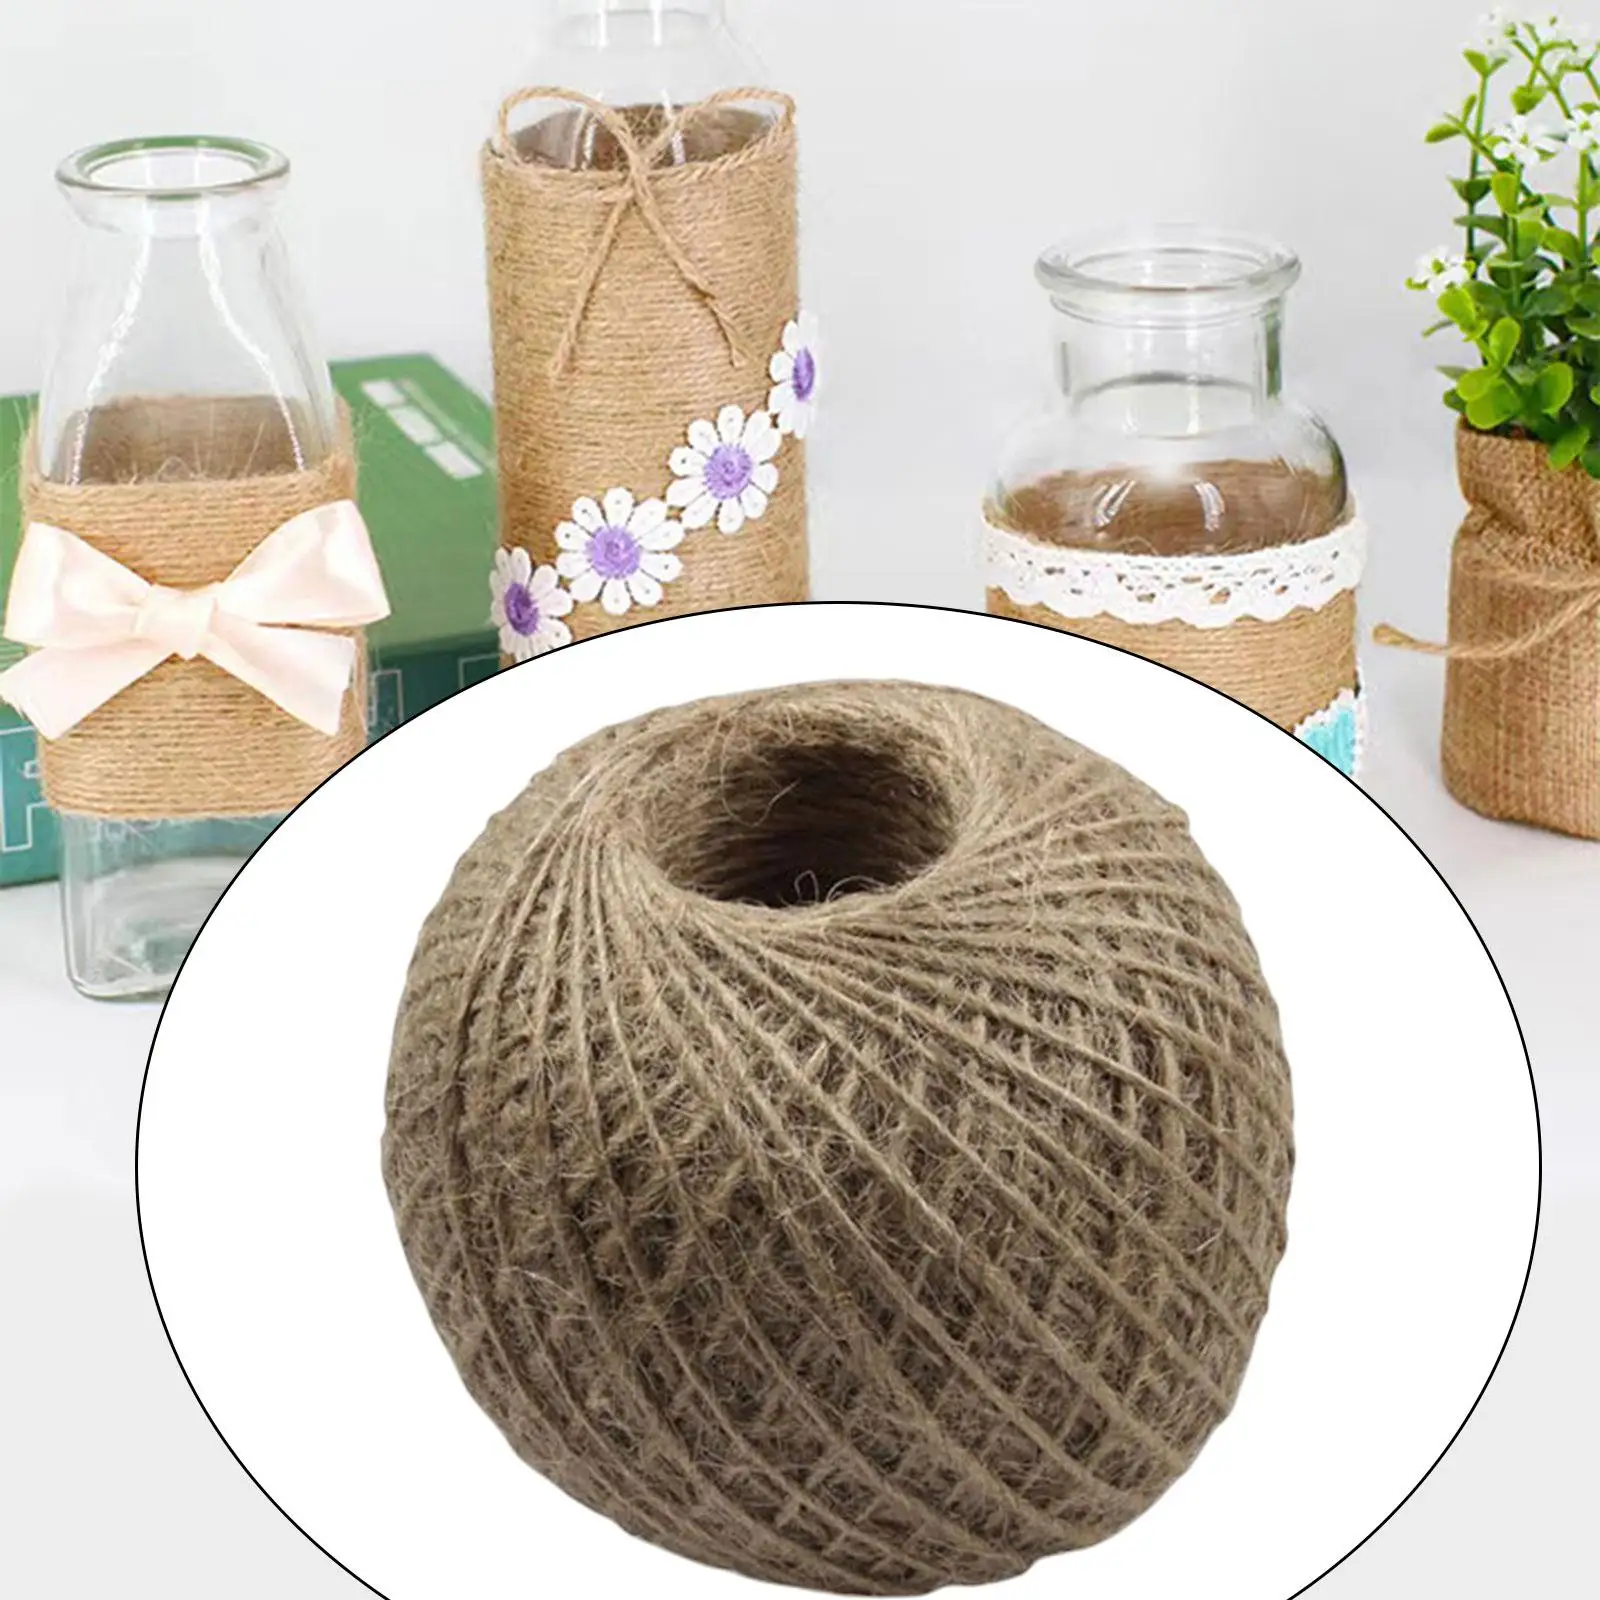 Jute Burlap Hemp String Eco Friendly Hand Woven Twisted Cord for Artwork Packing Materials Home Decor Gift Tags Plant Hanger